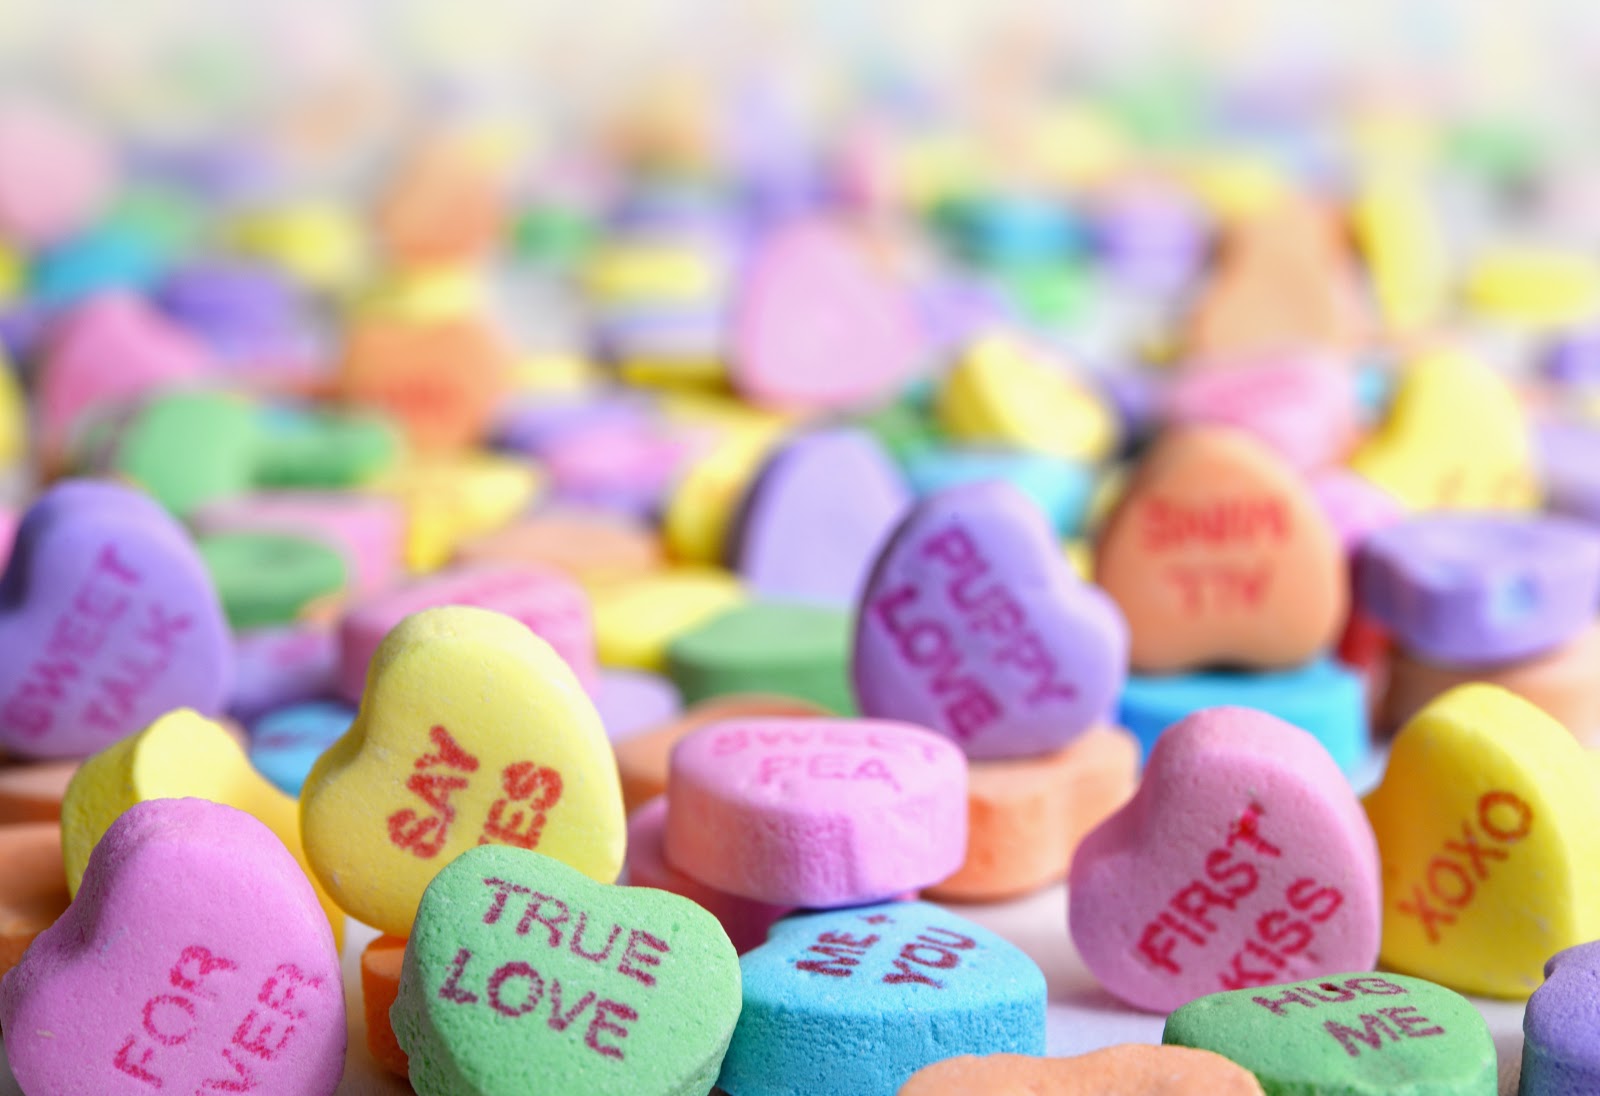 Image of candy hearts